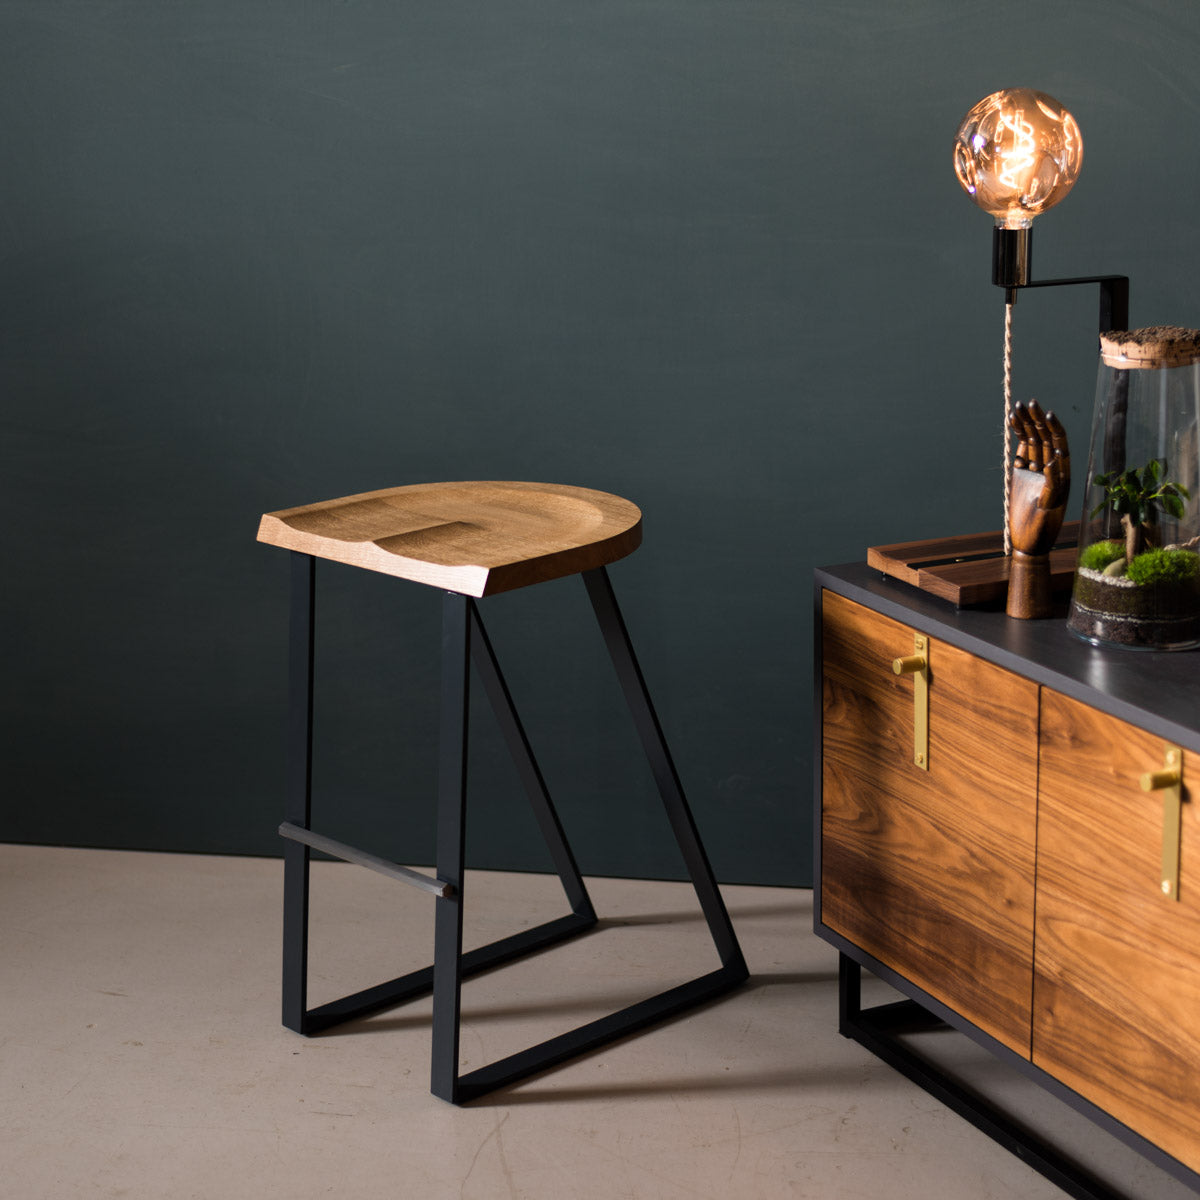 An image of the Oak Counter Stool, Angle product available from Koda Studios